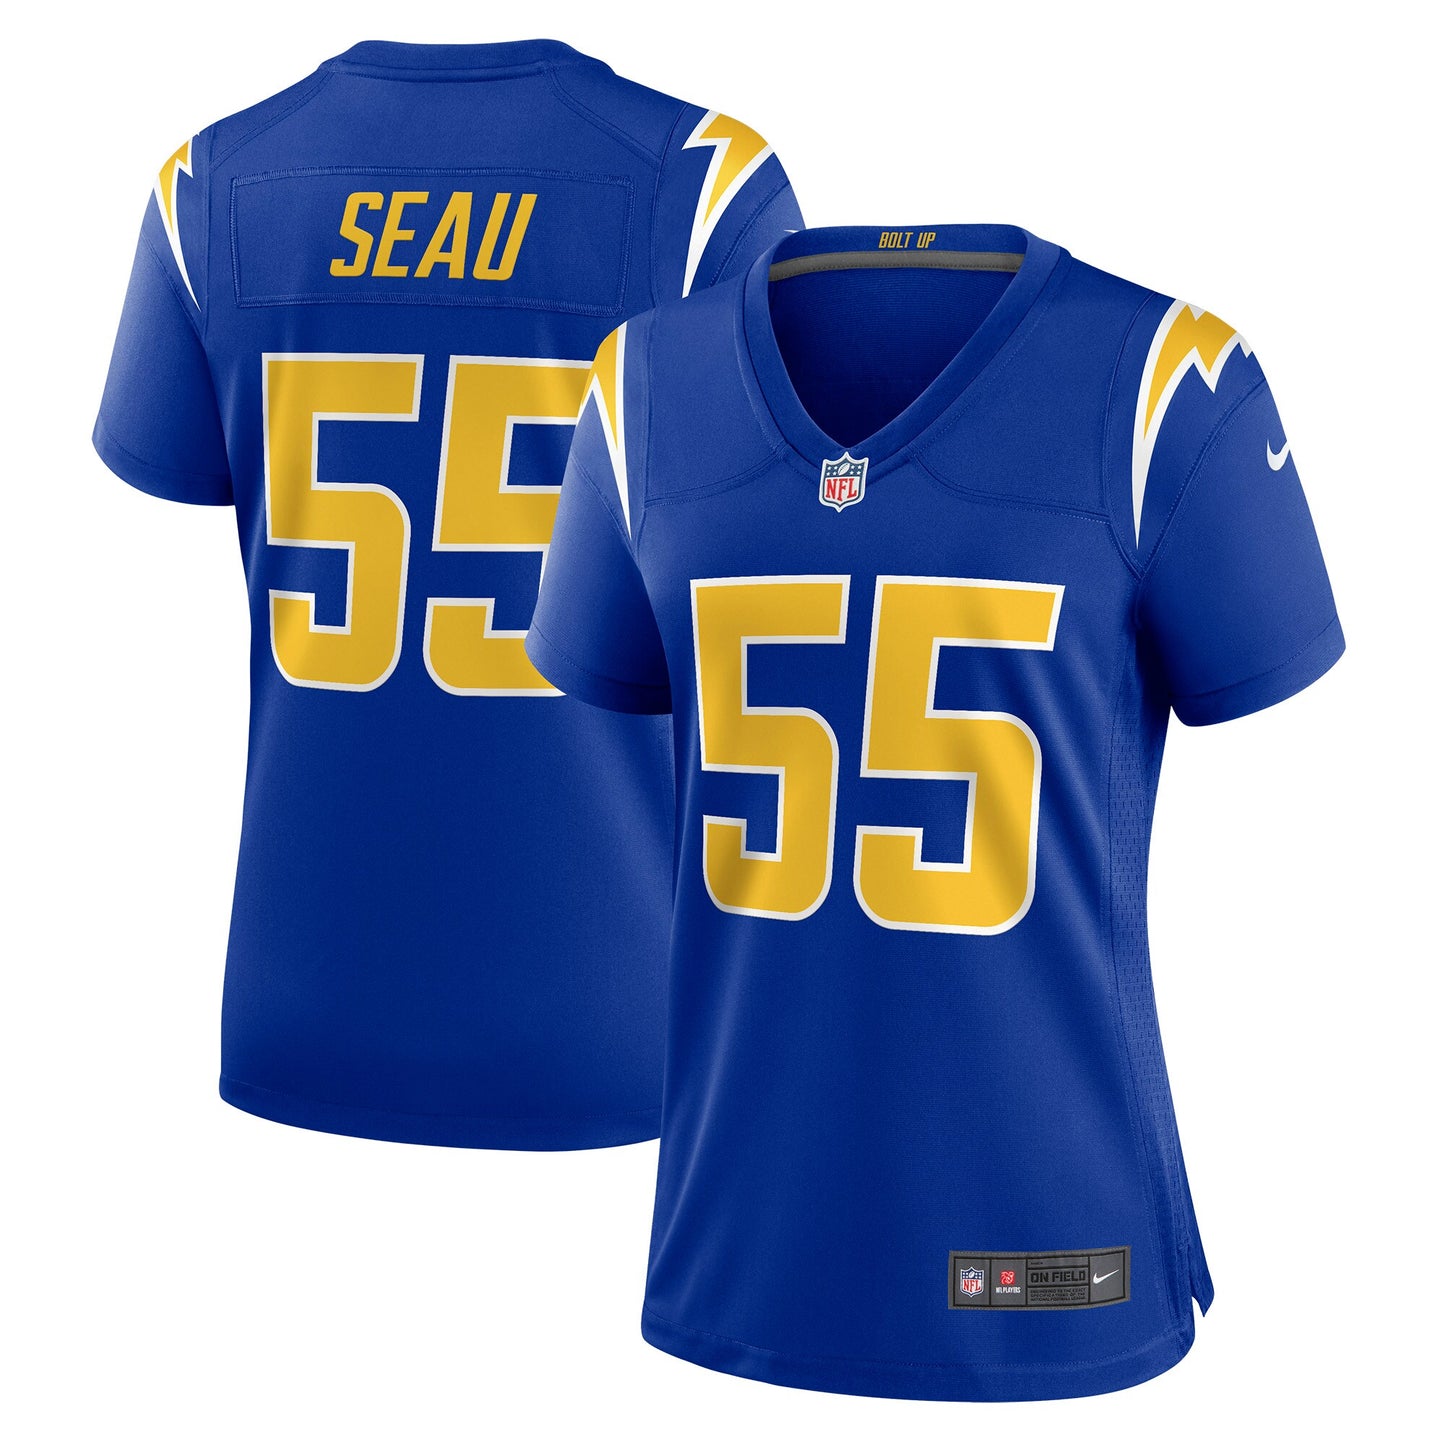 Junior Seau Los Angeles Chargers Nike Women's Retired Game Jersey - Royal